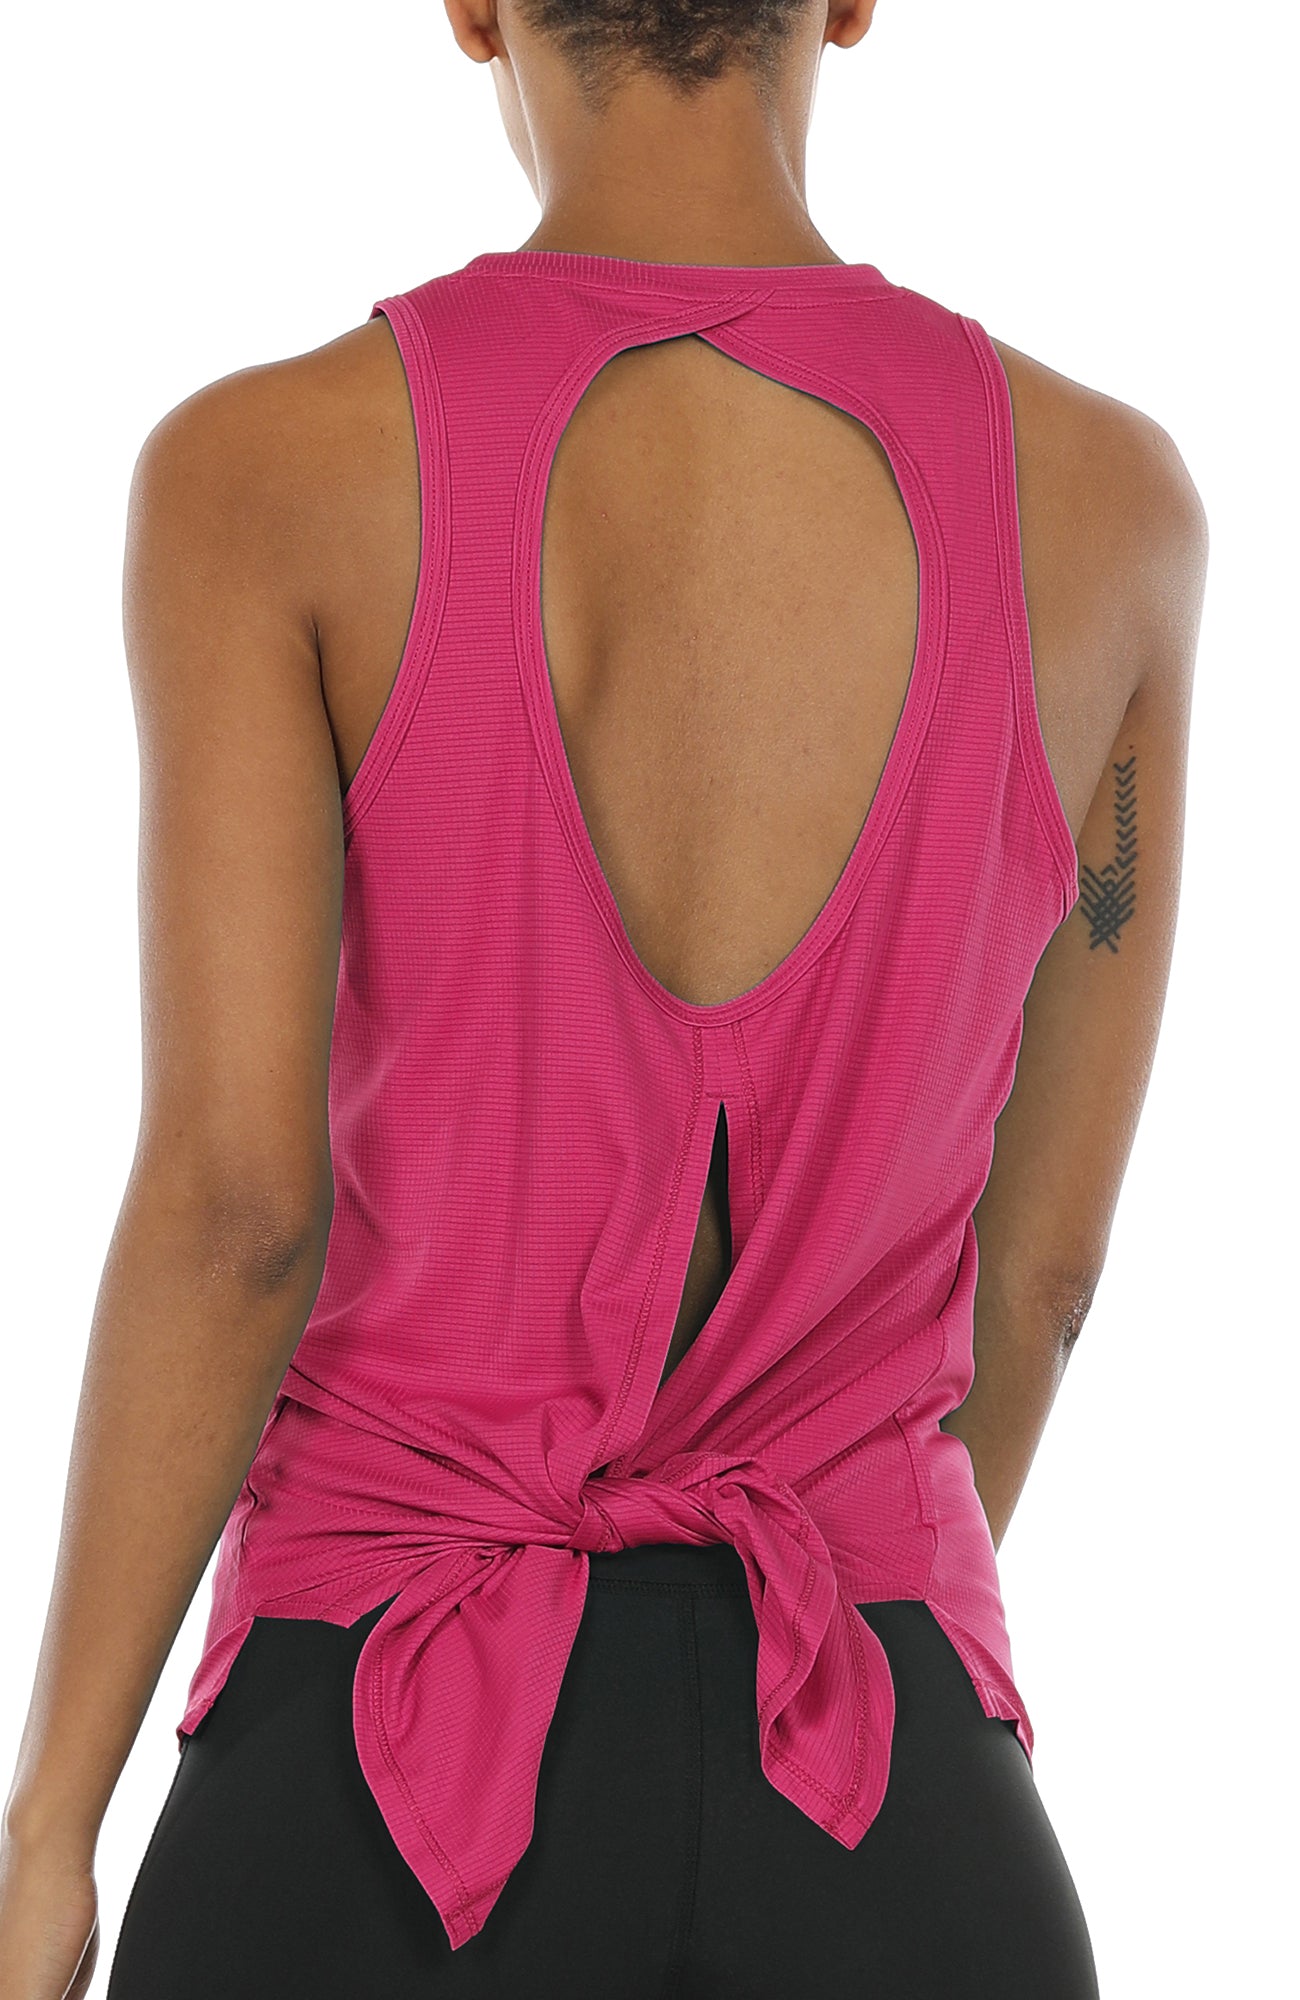 Aiithuug Workout Tank Tops for Women Open Back Strappy Athletic